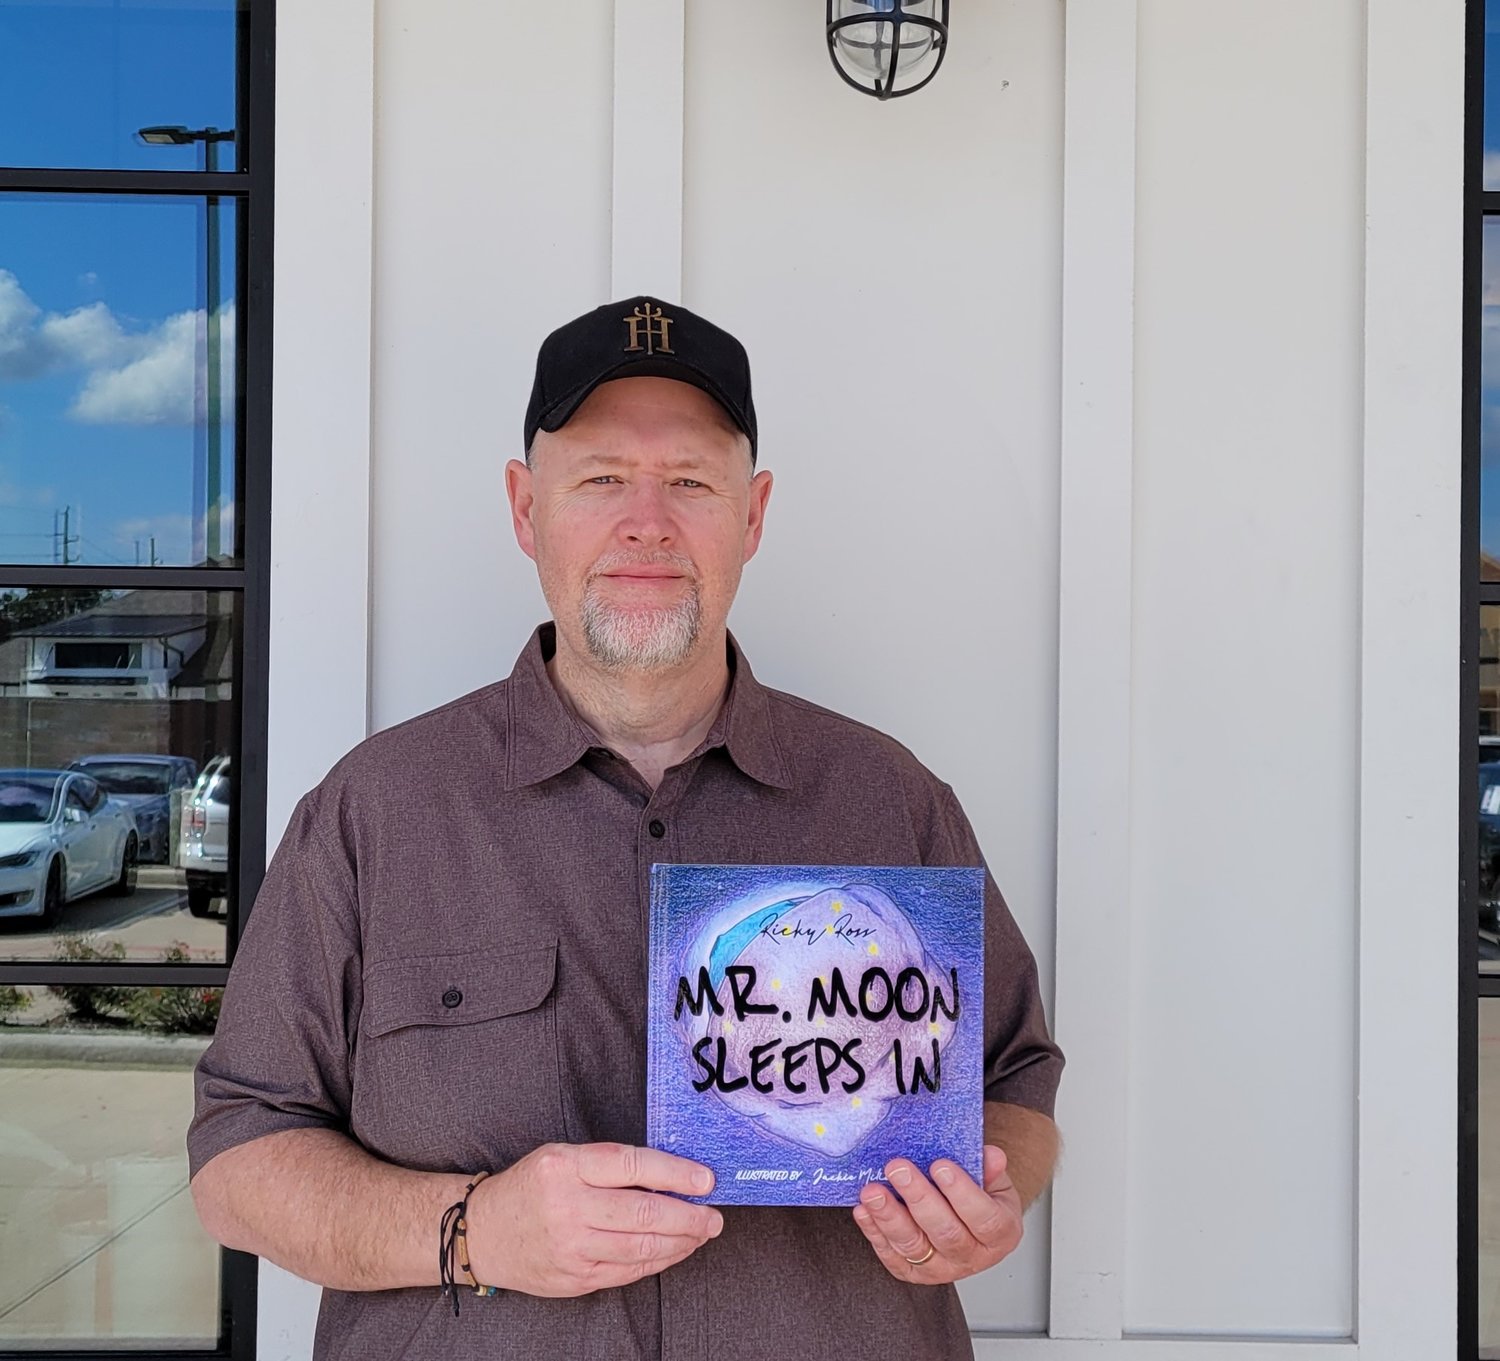 Ricky Ross holds a copy of his first book, “Mr. Moon Sleeps In” which is set for release on Nov. 15. Ross has additional books set for publishing over the next year and a half and is working to donate copies of those books to Katy ISD libraries to support children’s literacy throughout the Katy area.